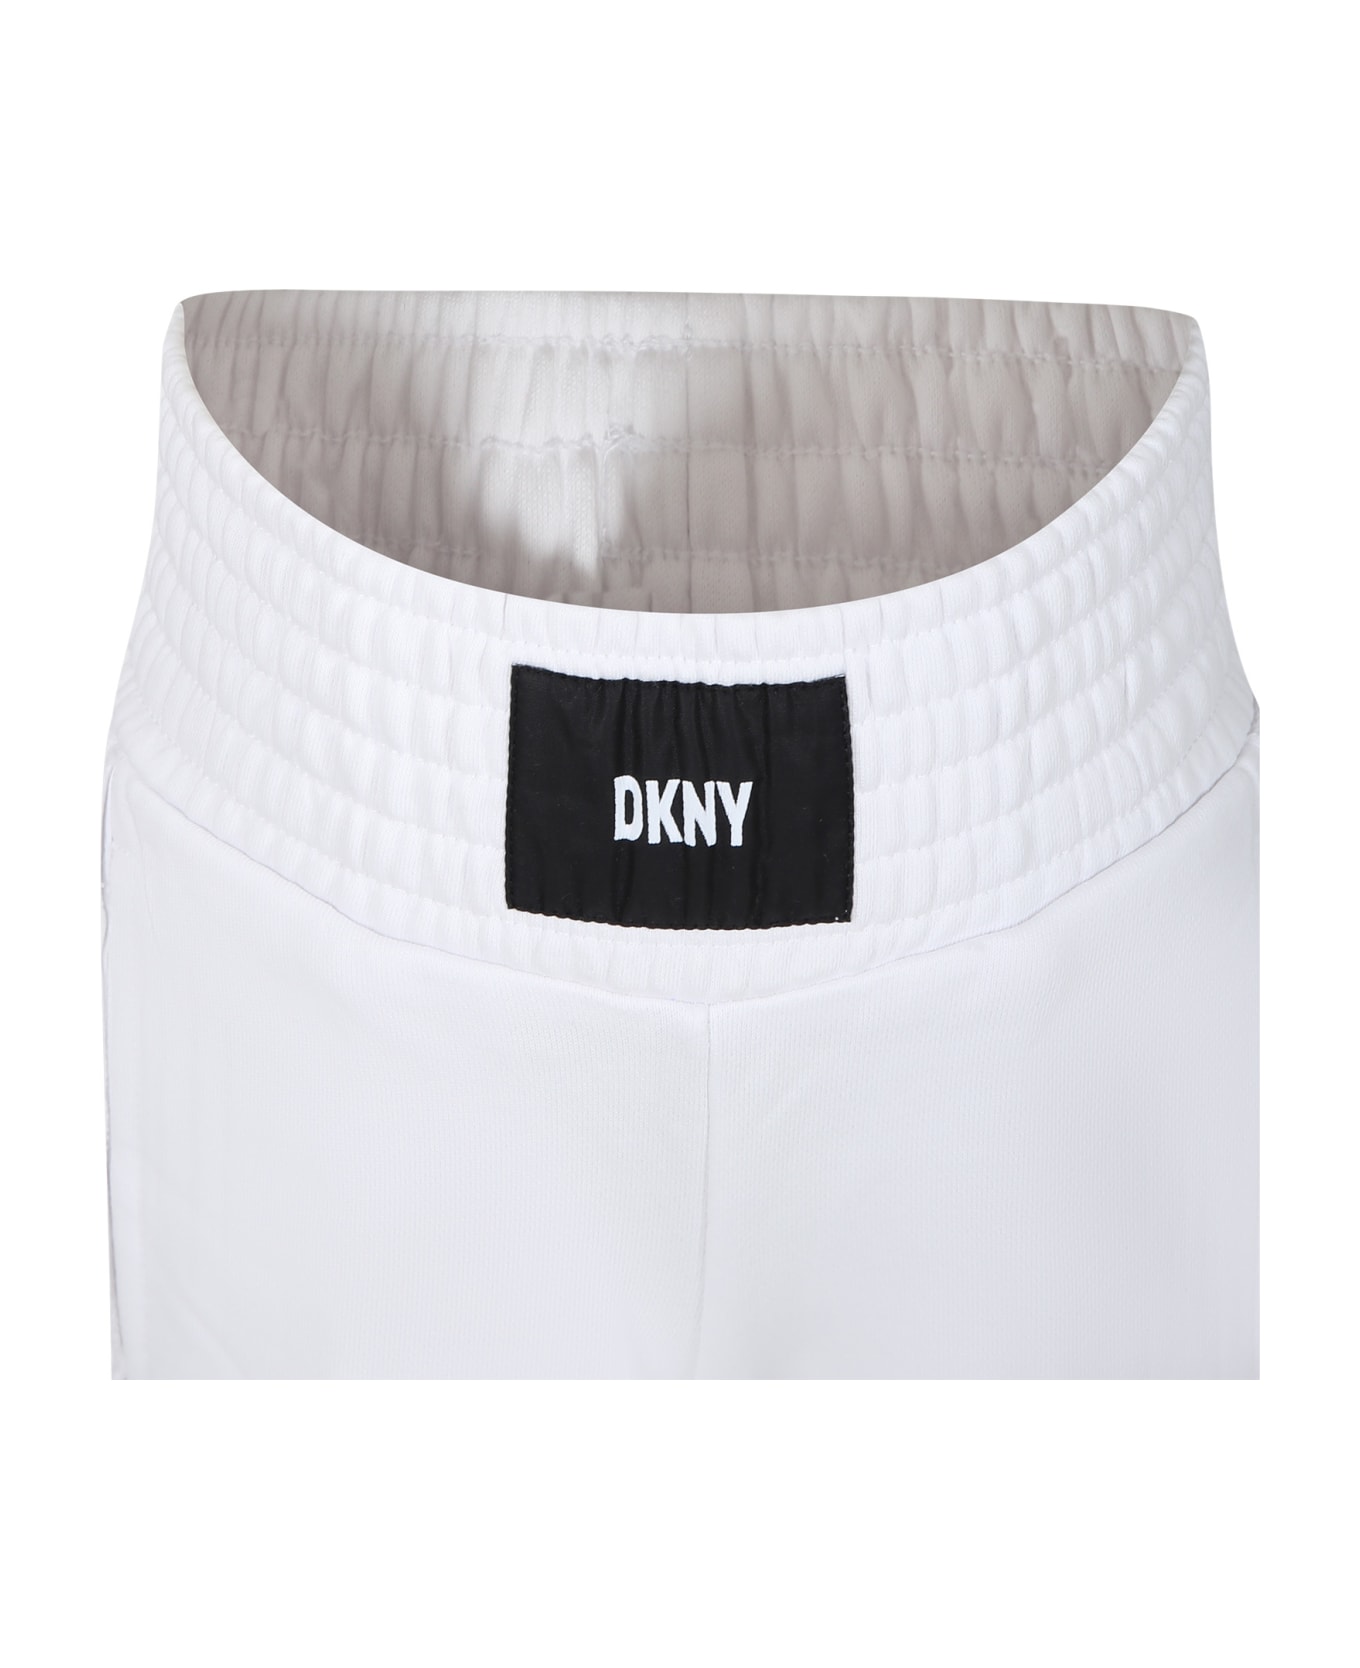 DKNY White Casual Shorts For Girl With Logo - White